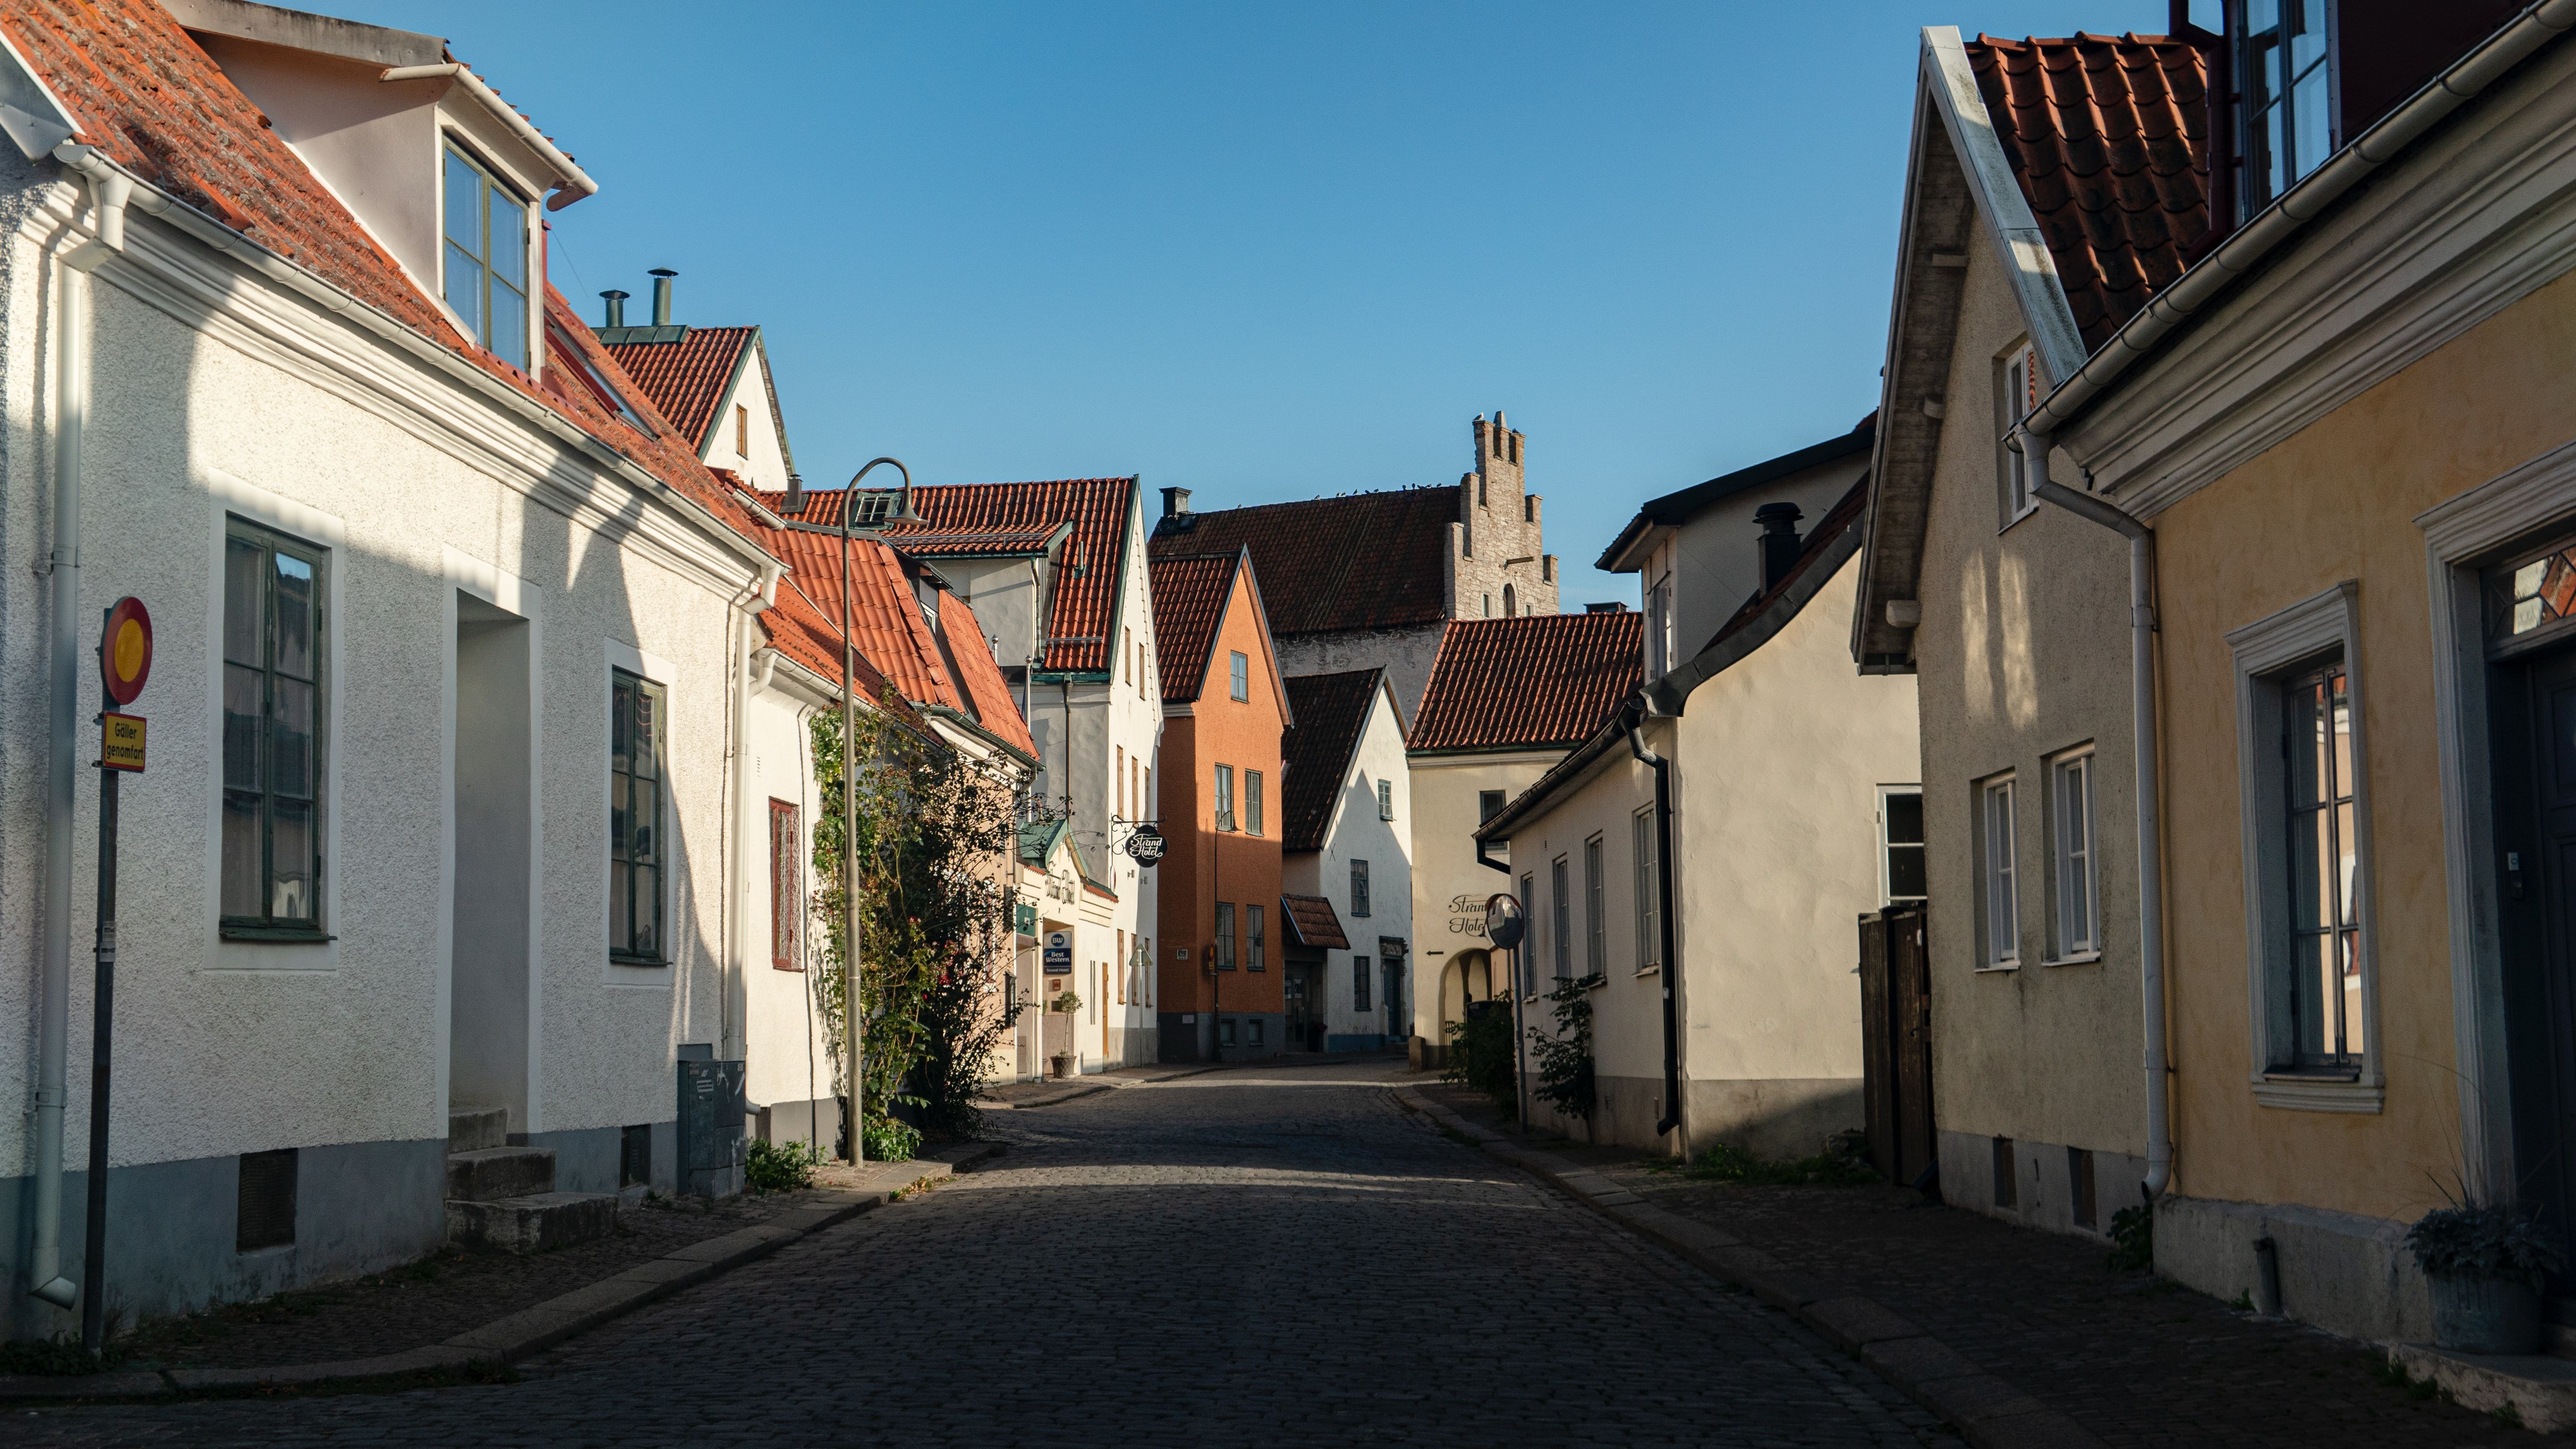 The Streets of Visby